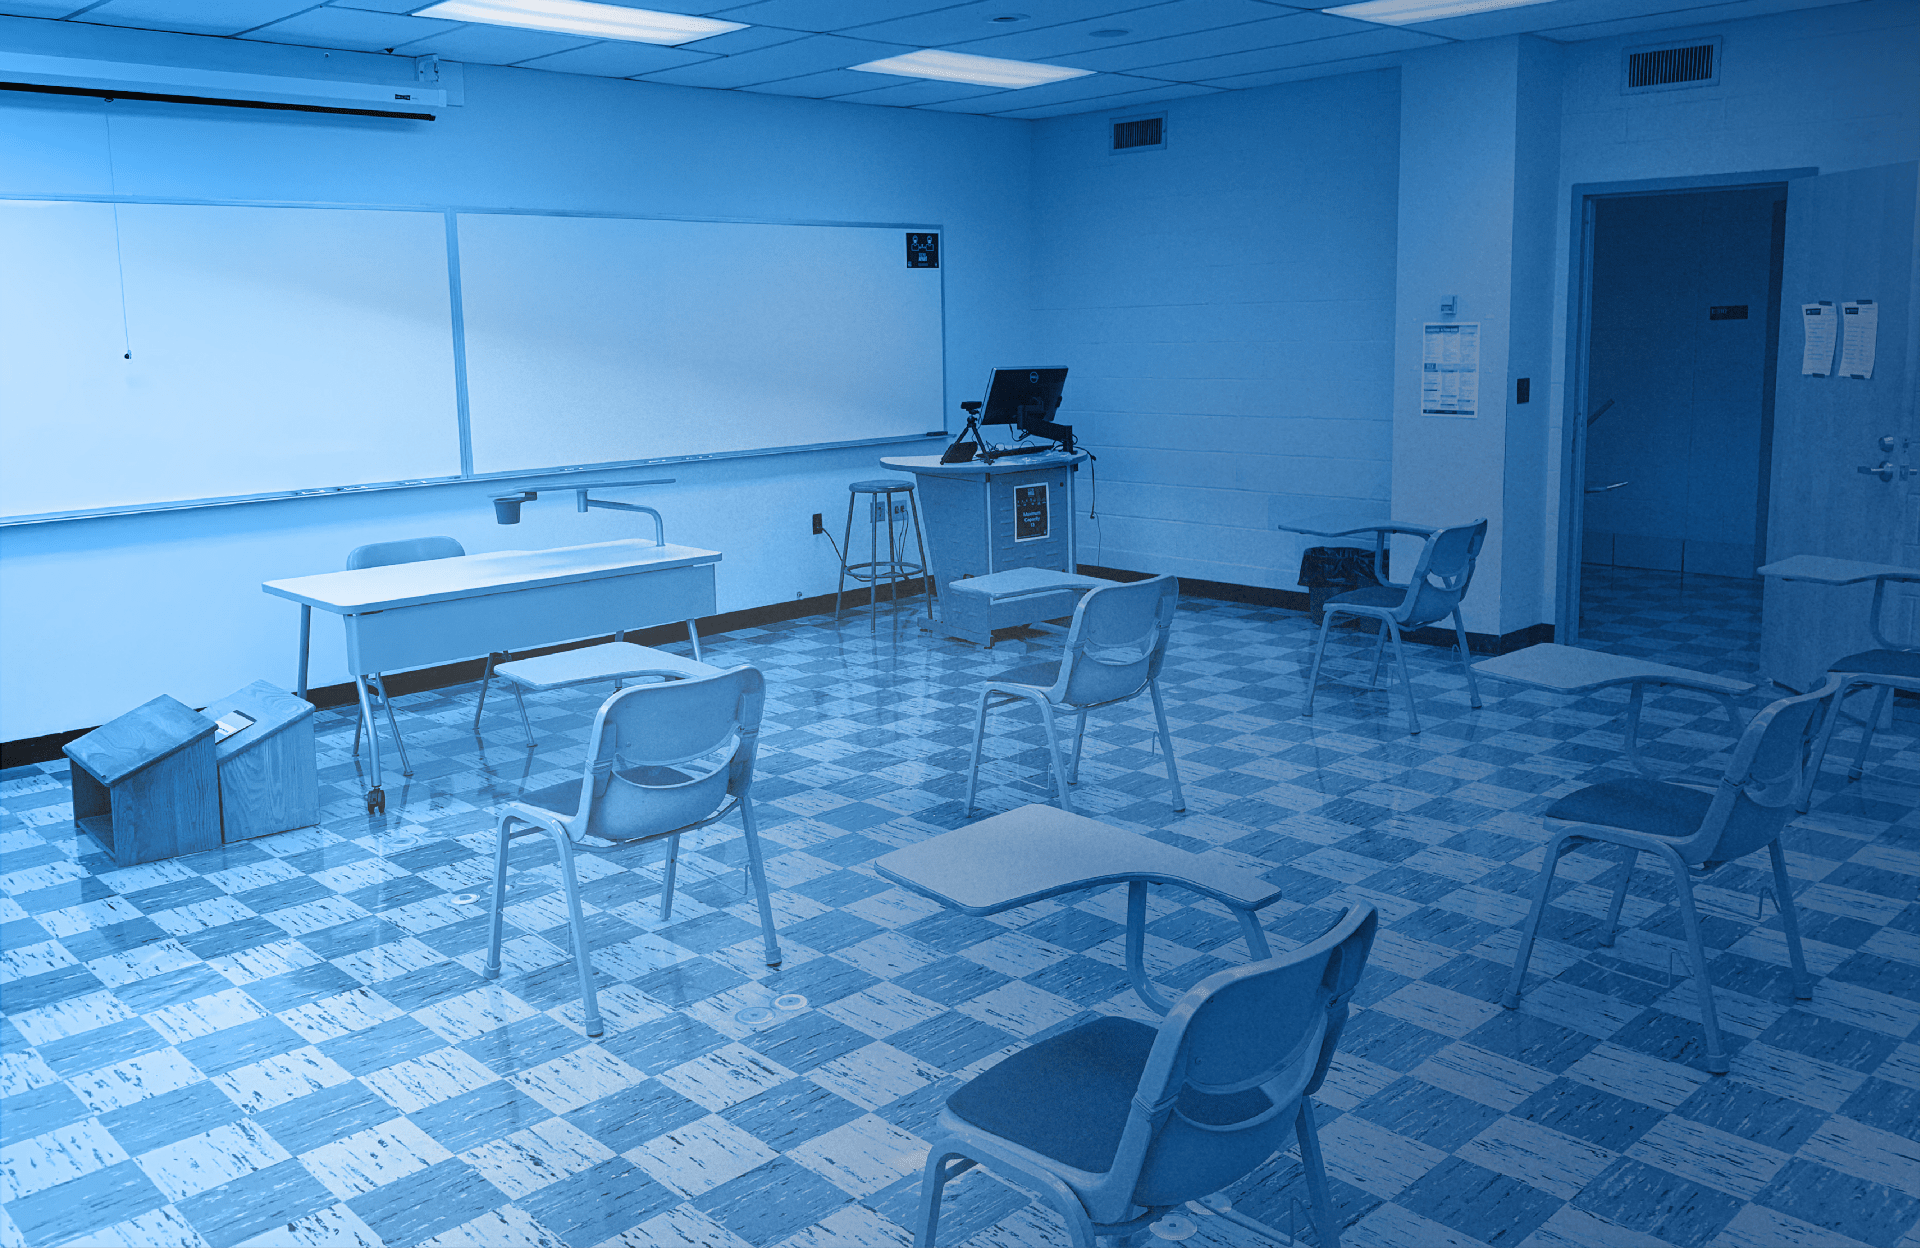 Classroom set up with desks socially distanced